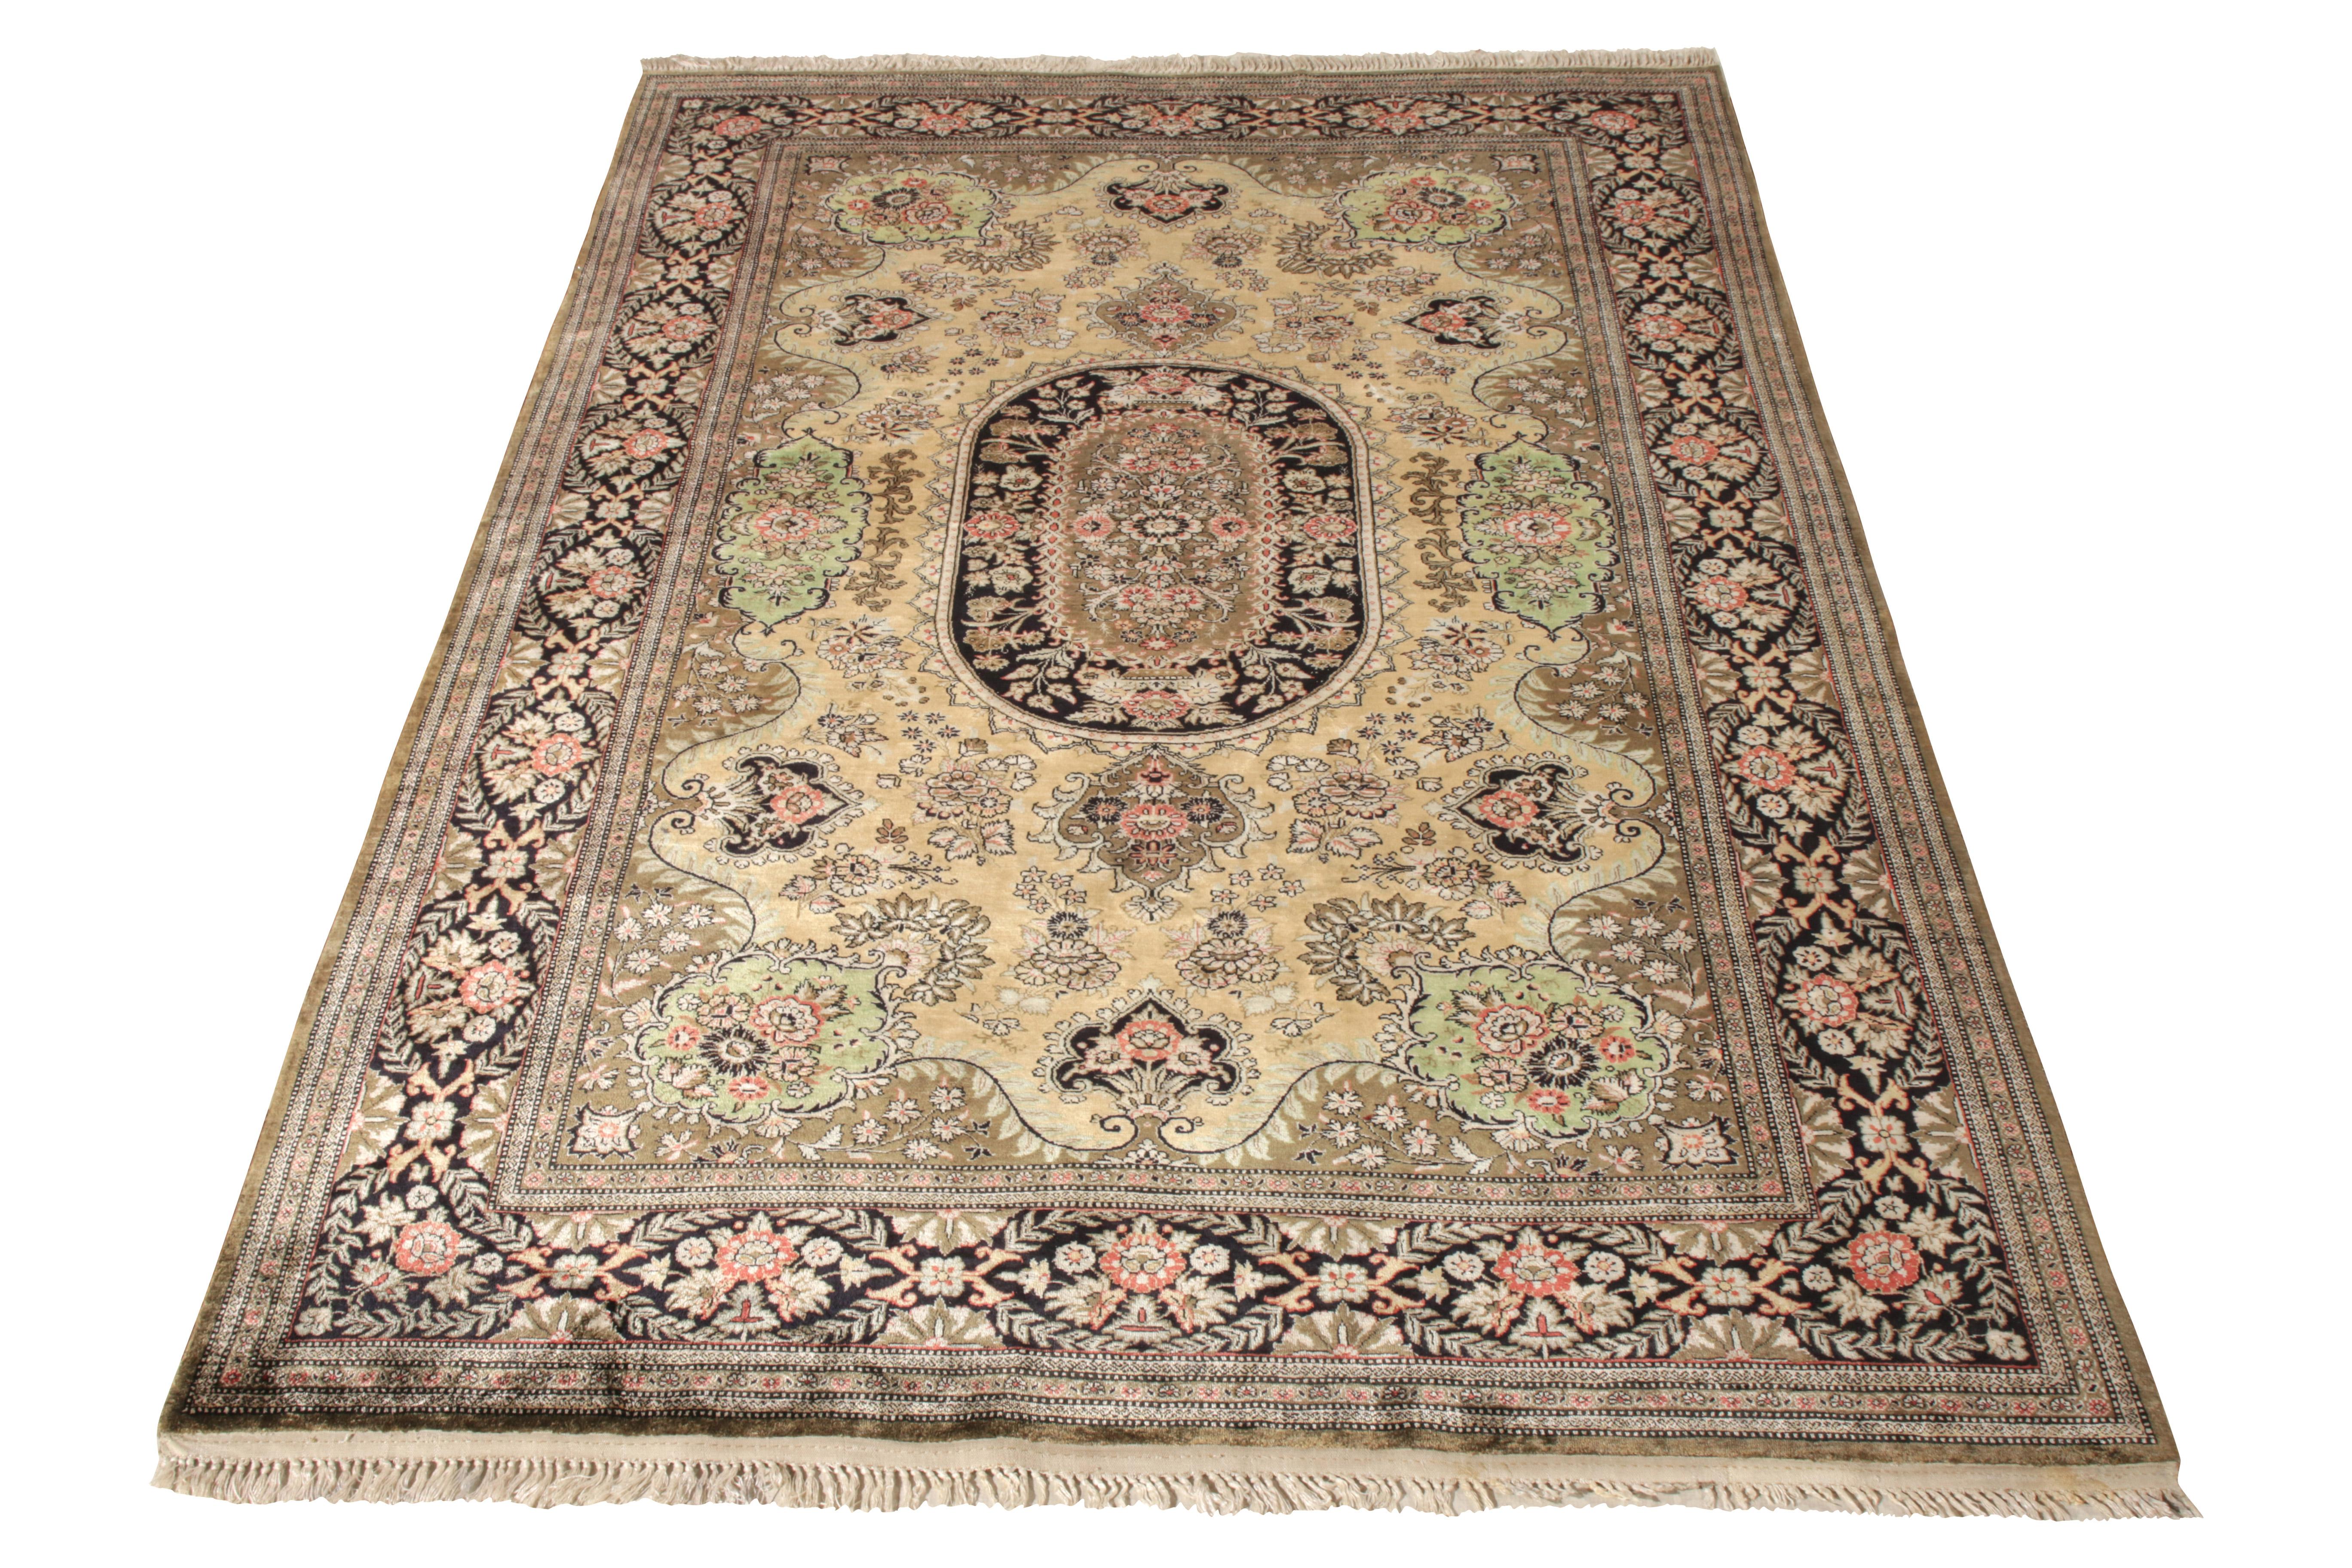 A hand-knotted silk Qum rug dated back to the 1950s joining Rug & Kilim’s Antique & Vintage collection. A classic 4x7 piece carrying a mesmerising medallion pattern enveloped in a rich all over floral design. The rug flourishes in rich tones of